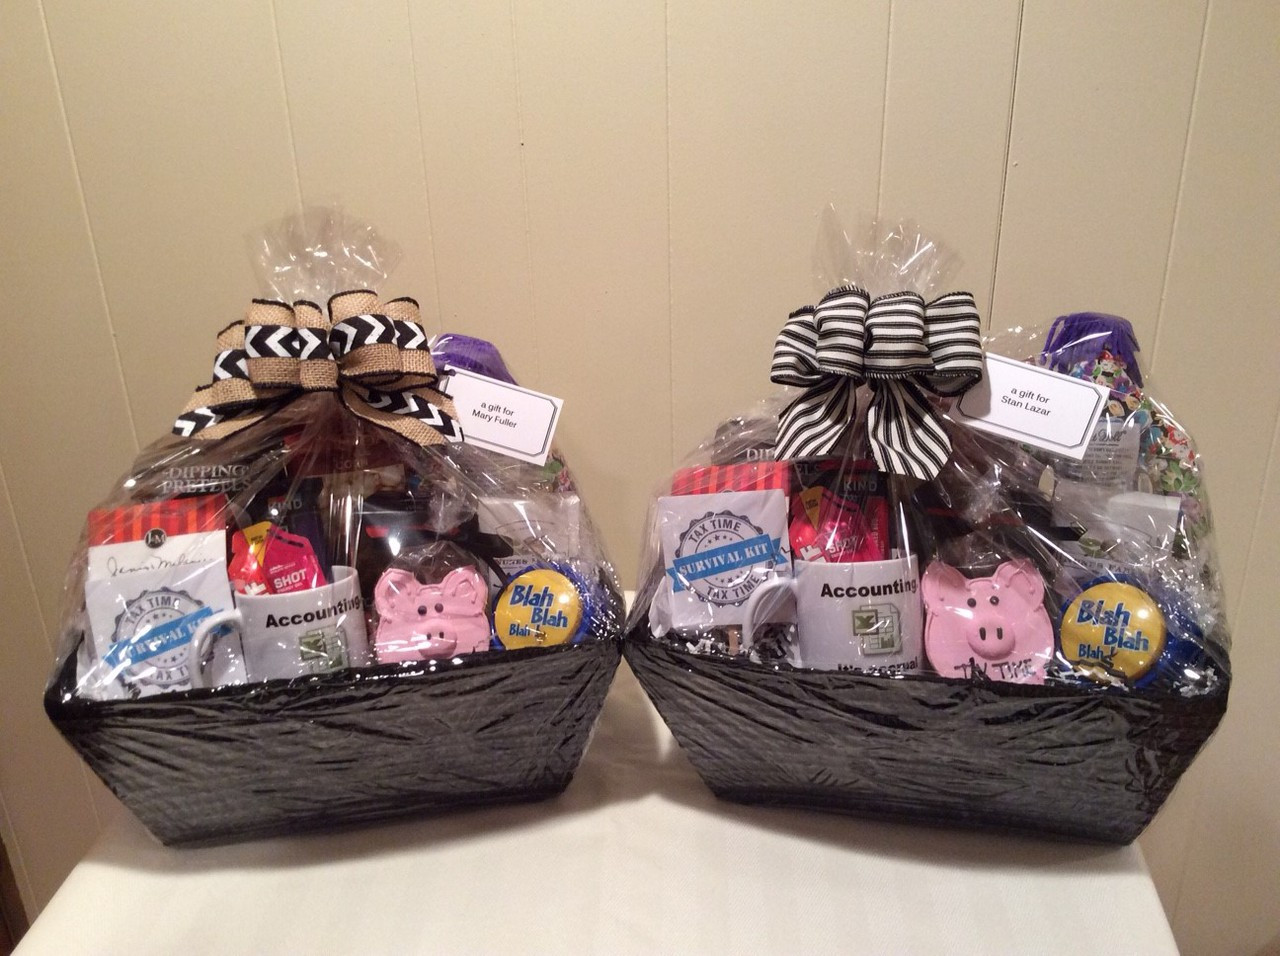 Gift Box, Custom Gifts, Hampers & Corporate Gifts